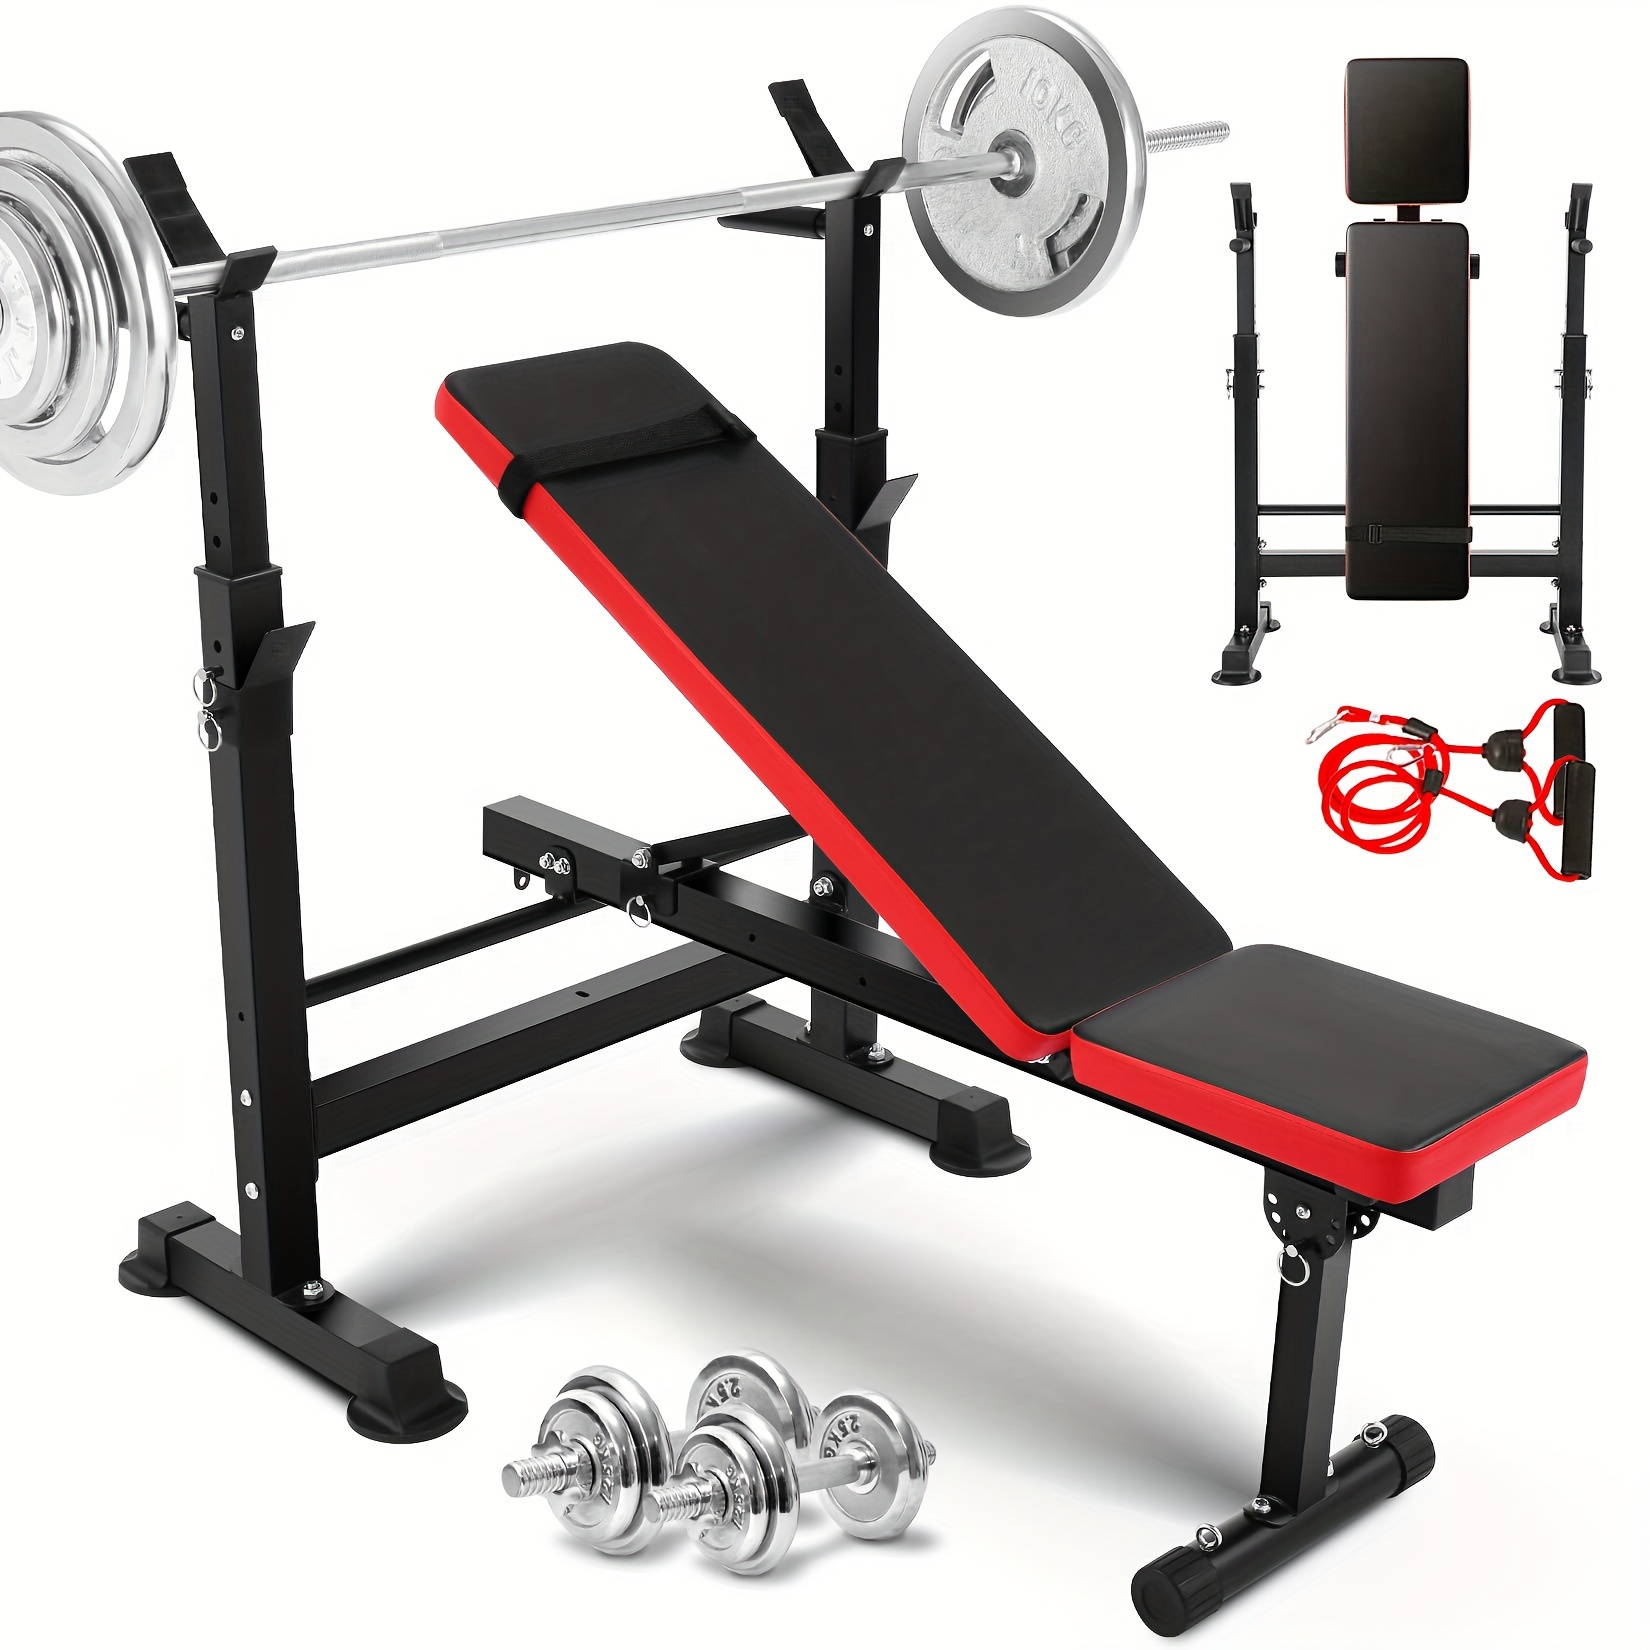 

Professional All In 1 Weight Bench Set With Squat Rack, Adjustable & Foldable Workout Bench Press Set With Leg Developer, Preacher Pad For Home Gym Full Body Workout